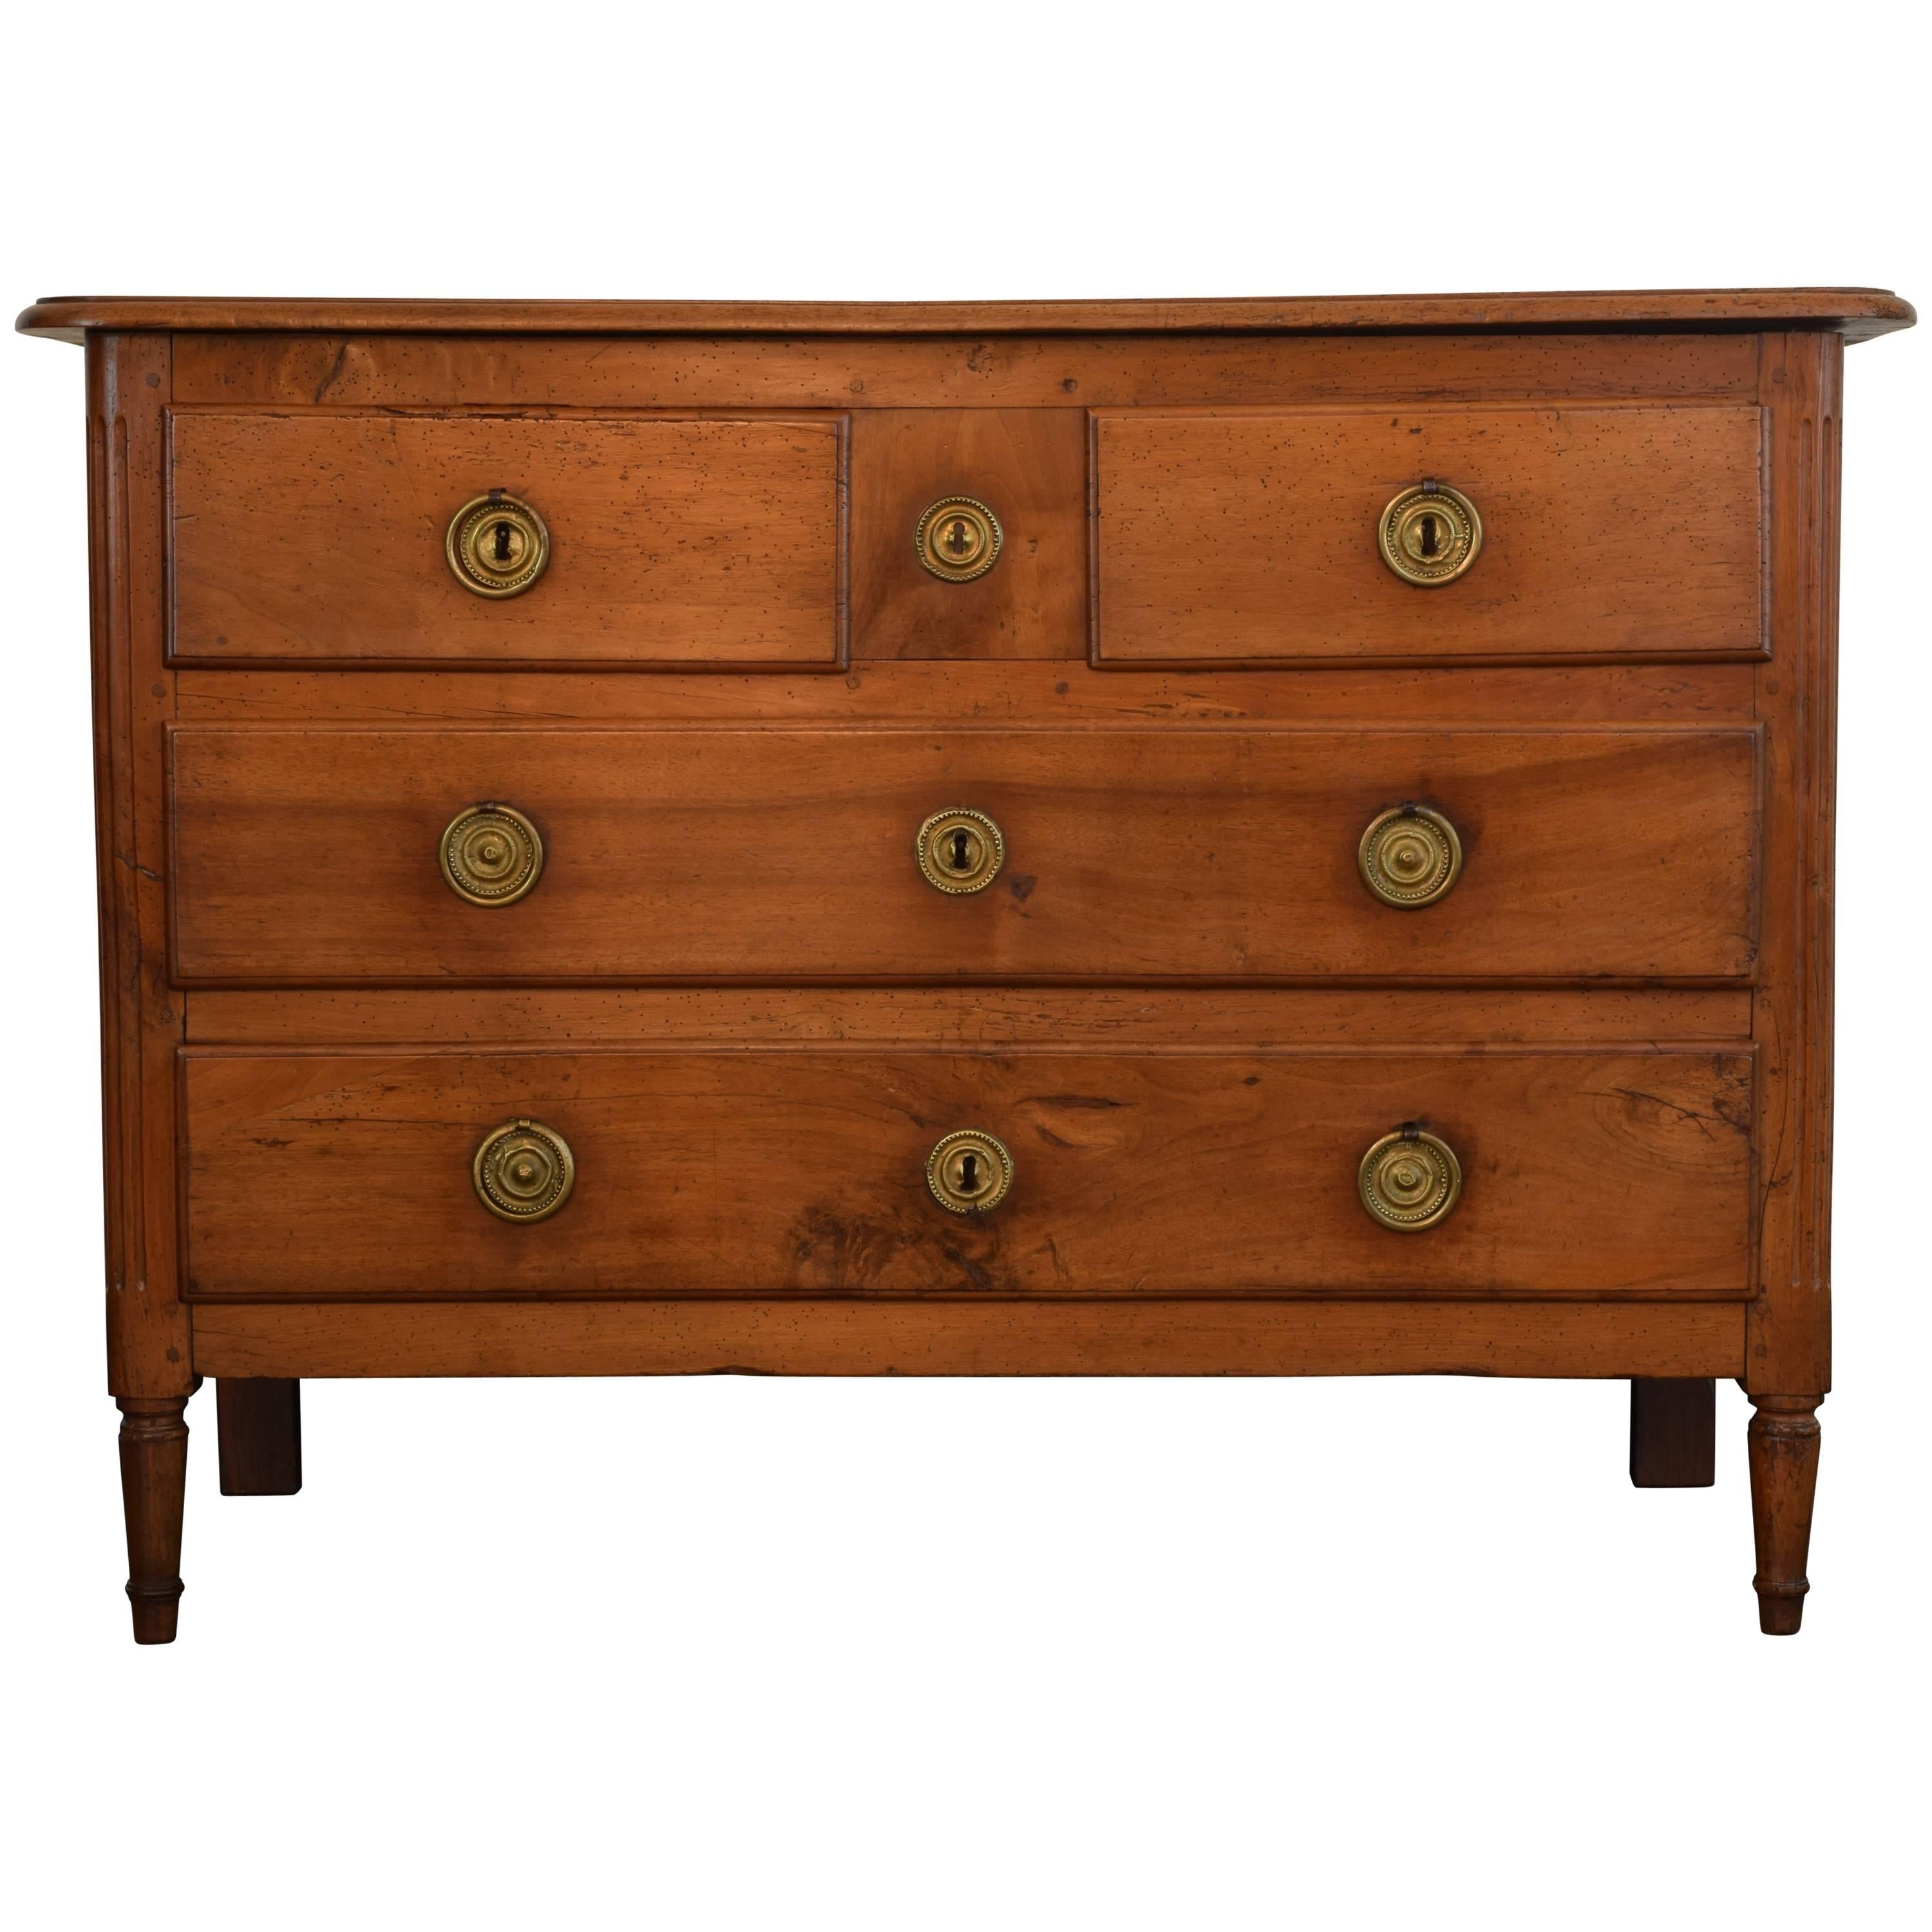 Late LXVI Period French Light Walnut Four-Drawer Commode